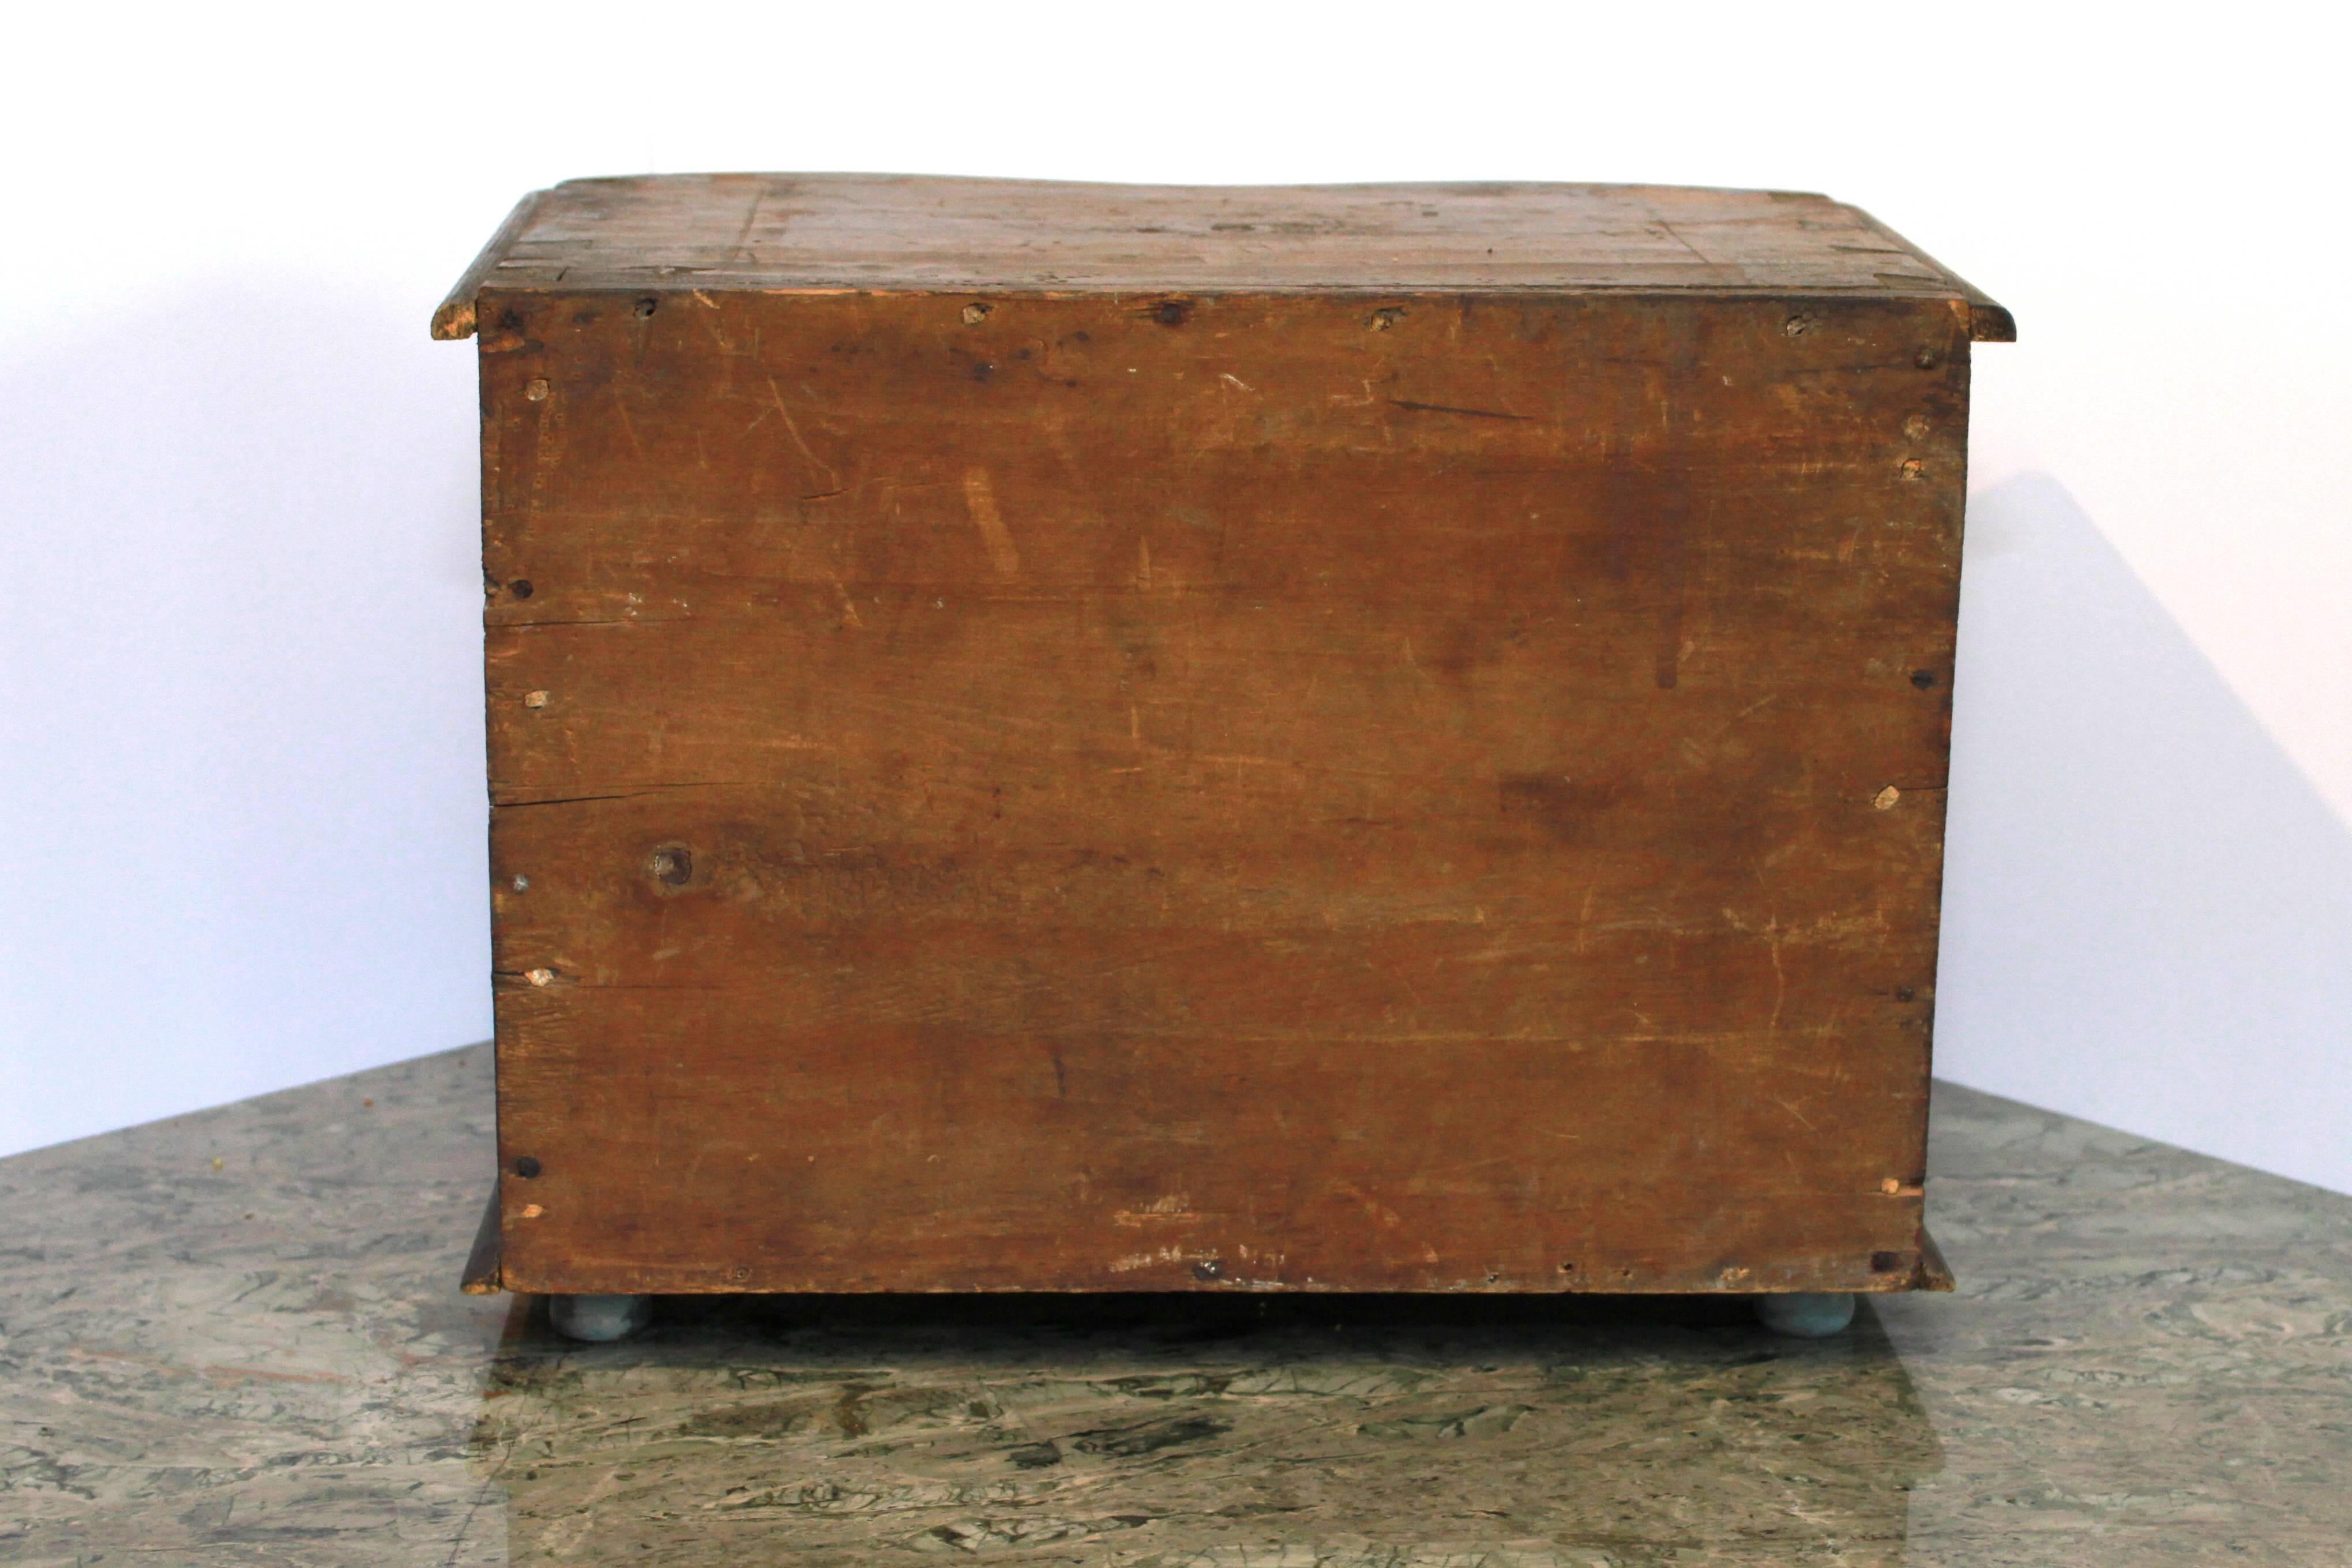 French Provincial Early 19th Century Painted Jewelry Box from a Southern Swiss Alp Farmhouse For Sale